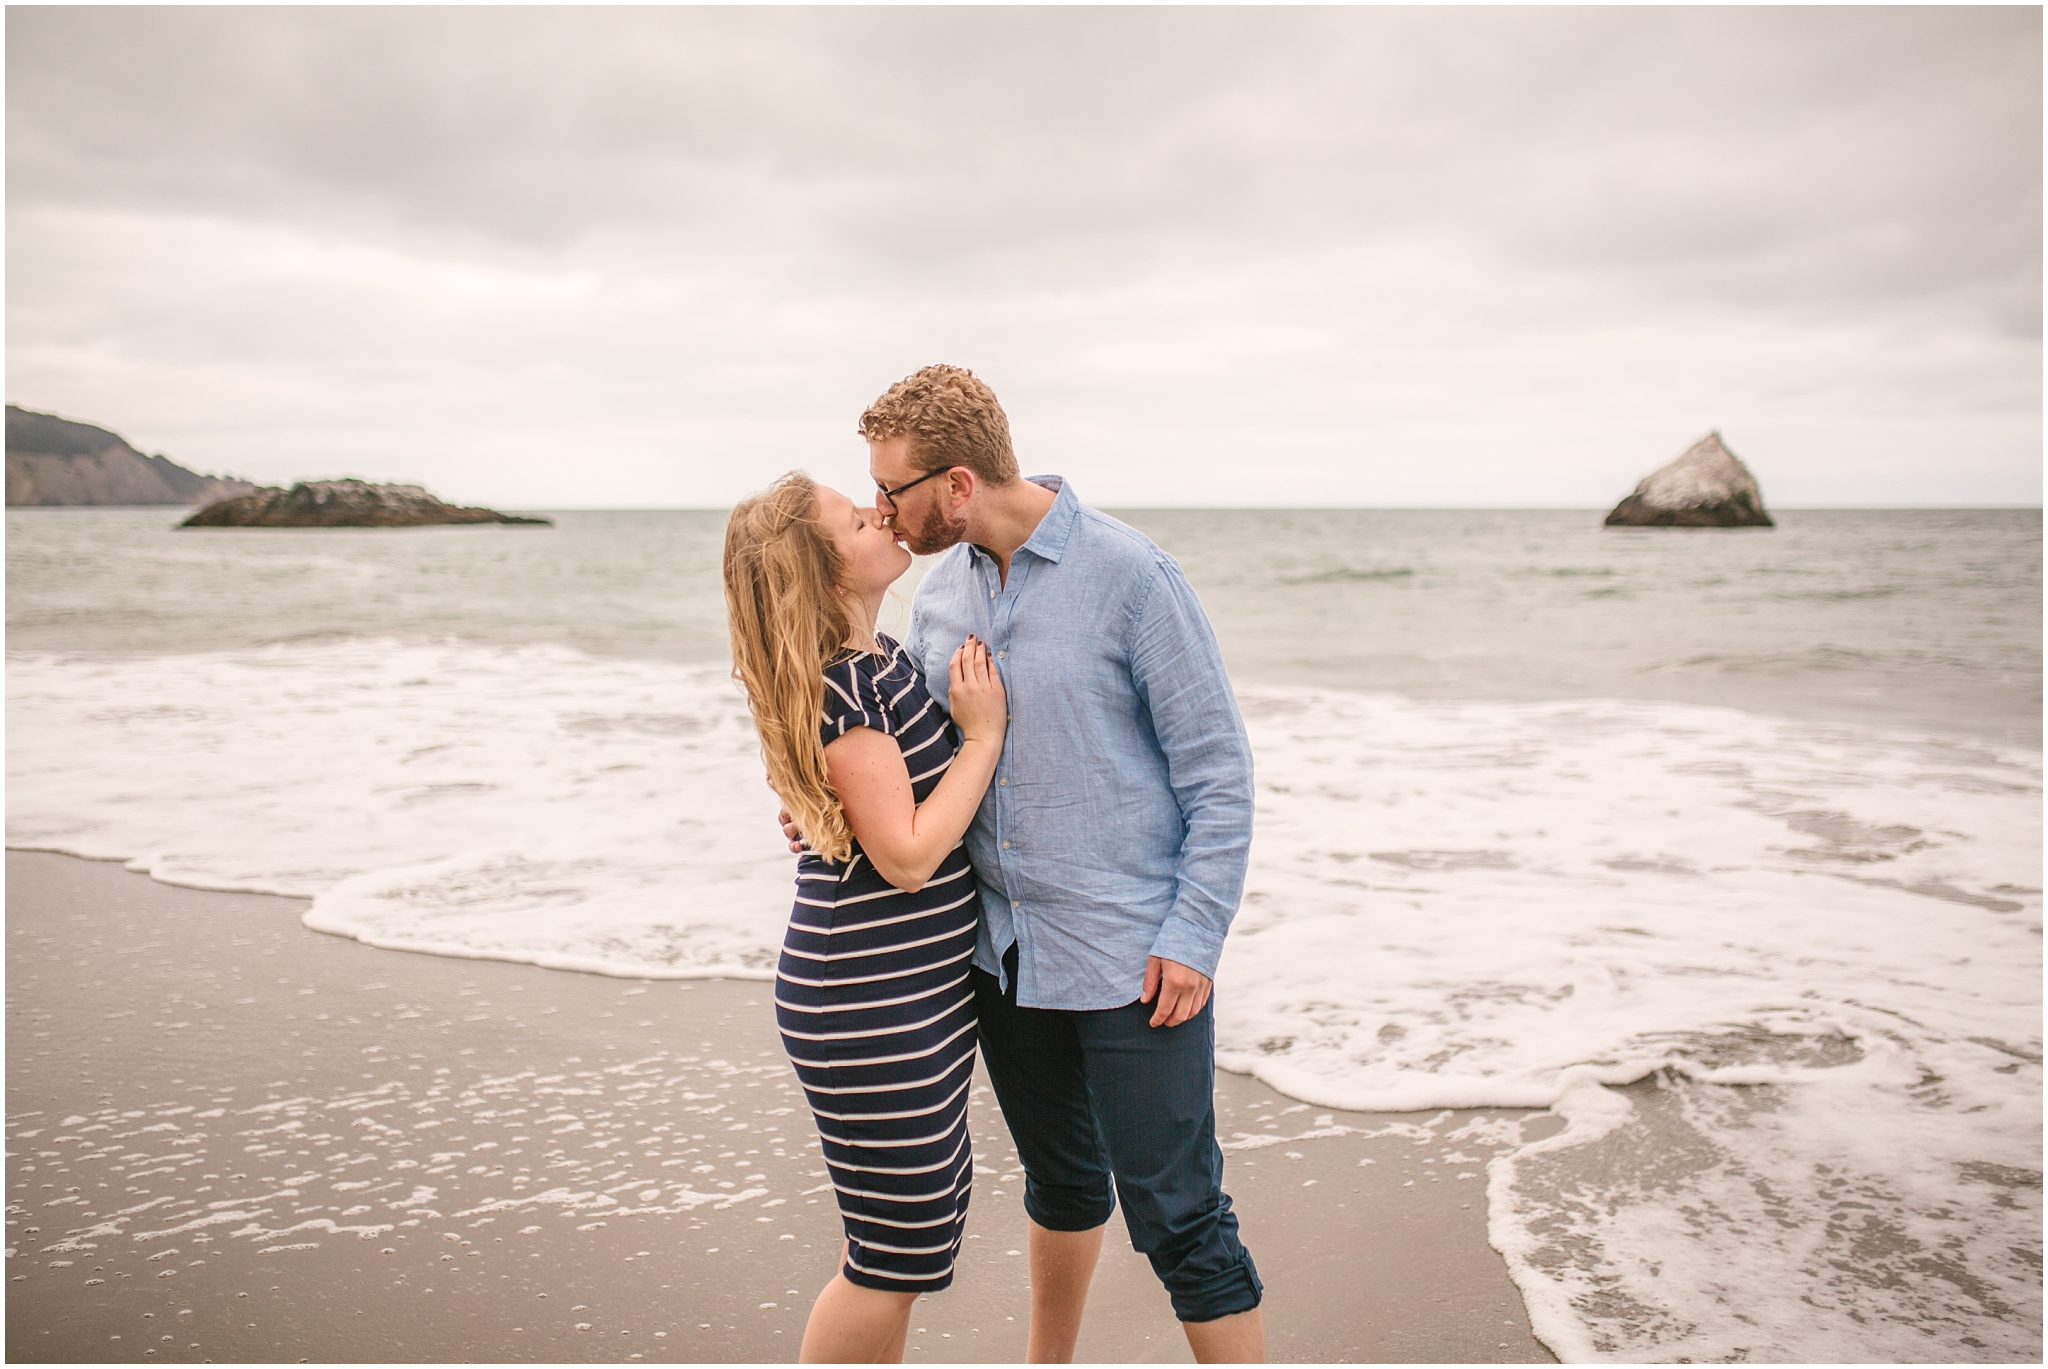 Kissing couple on the beach - Marshall Beach San Francisco engagement pictures